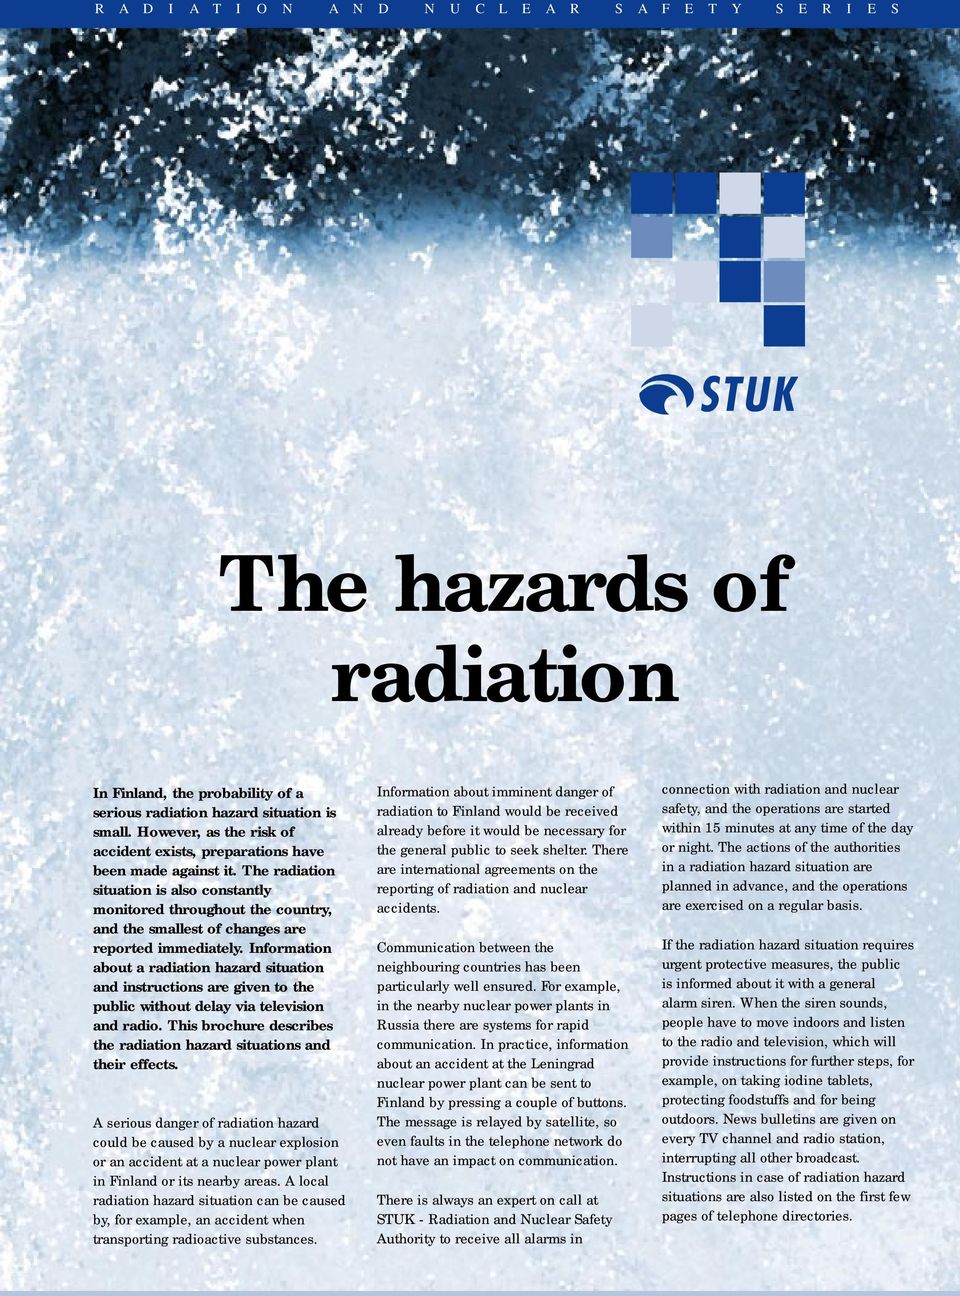 The radiation situation is also constantly monitored throughout the country, and the smallest of changes are reported immediately.